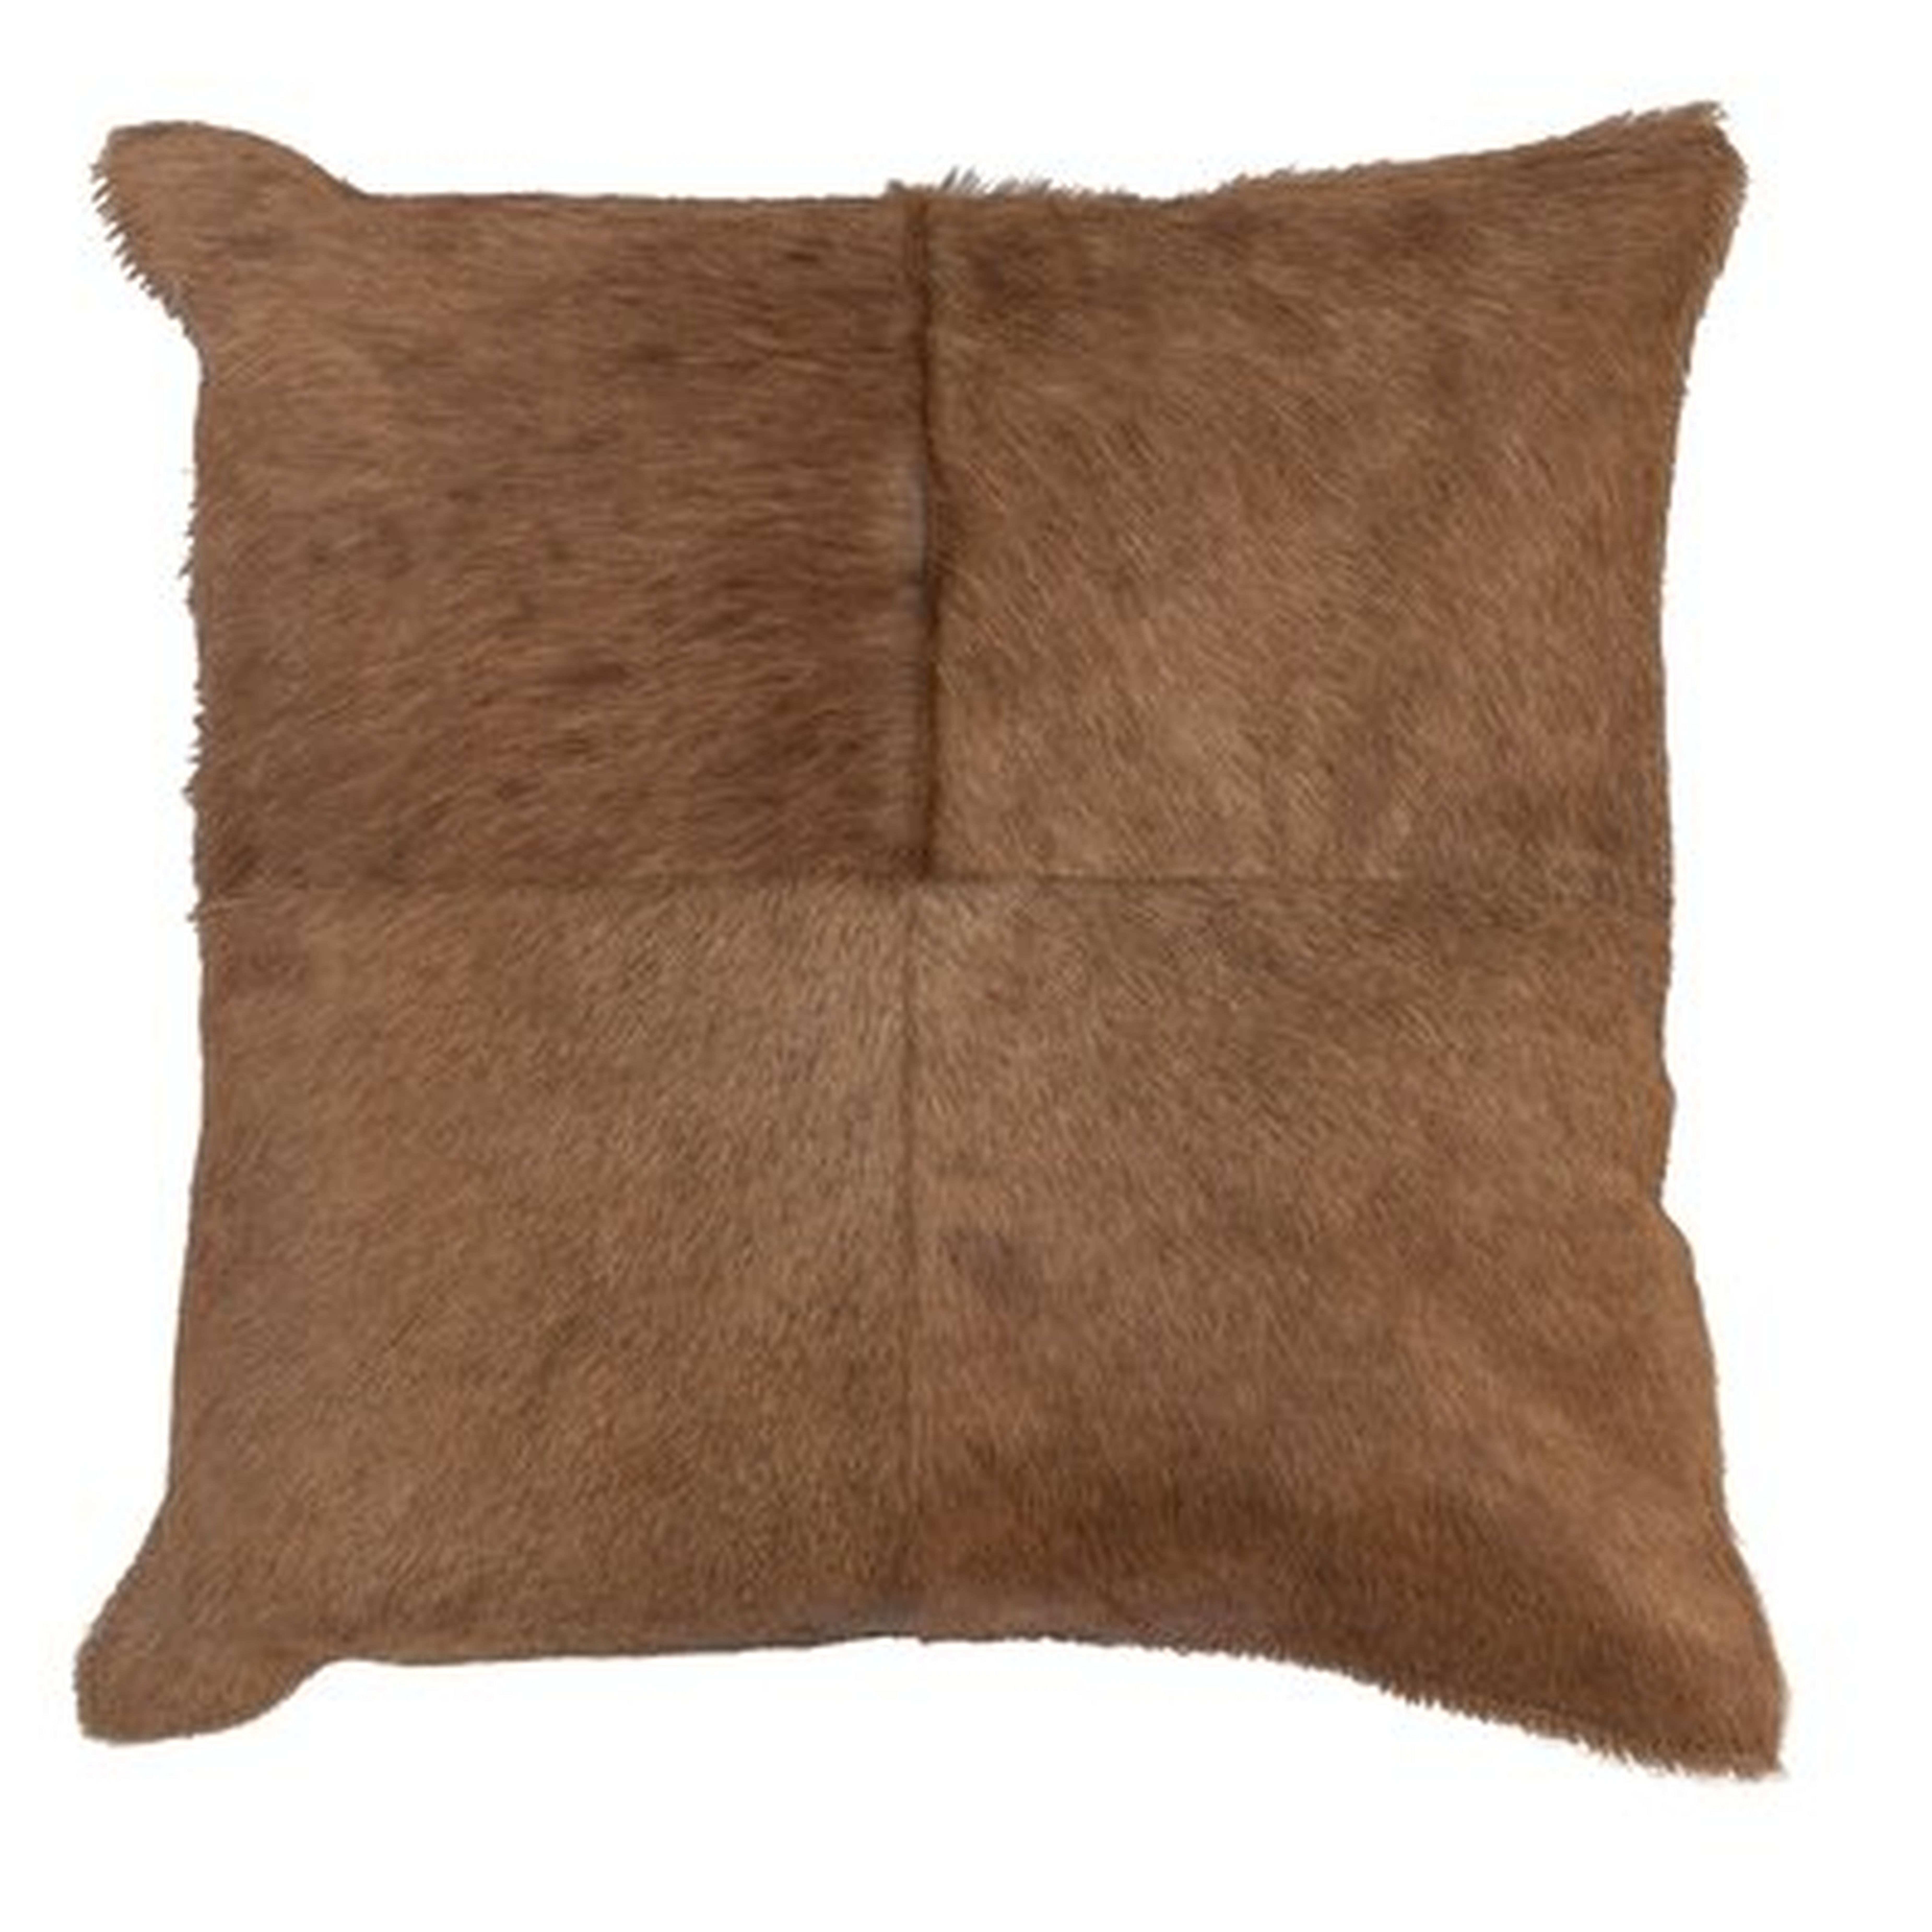 Square Leather Pillow Cover & Insert - Wayfair